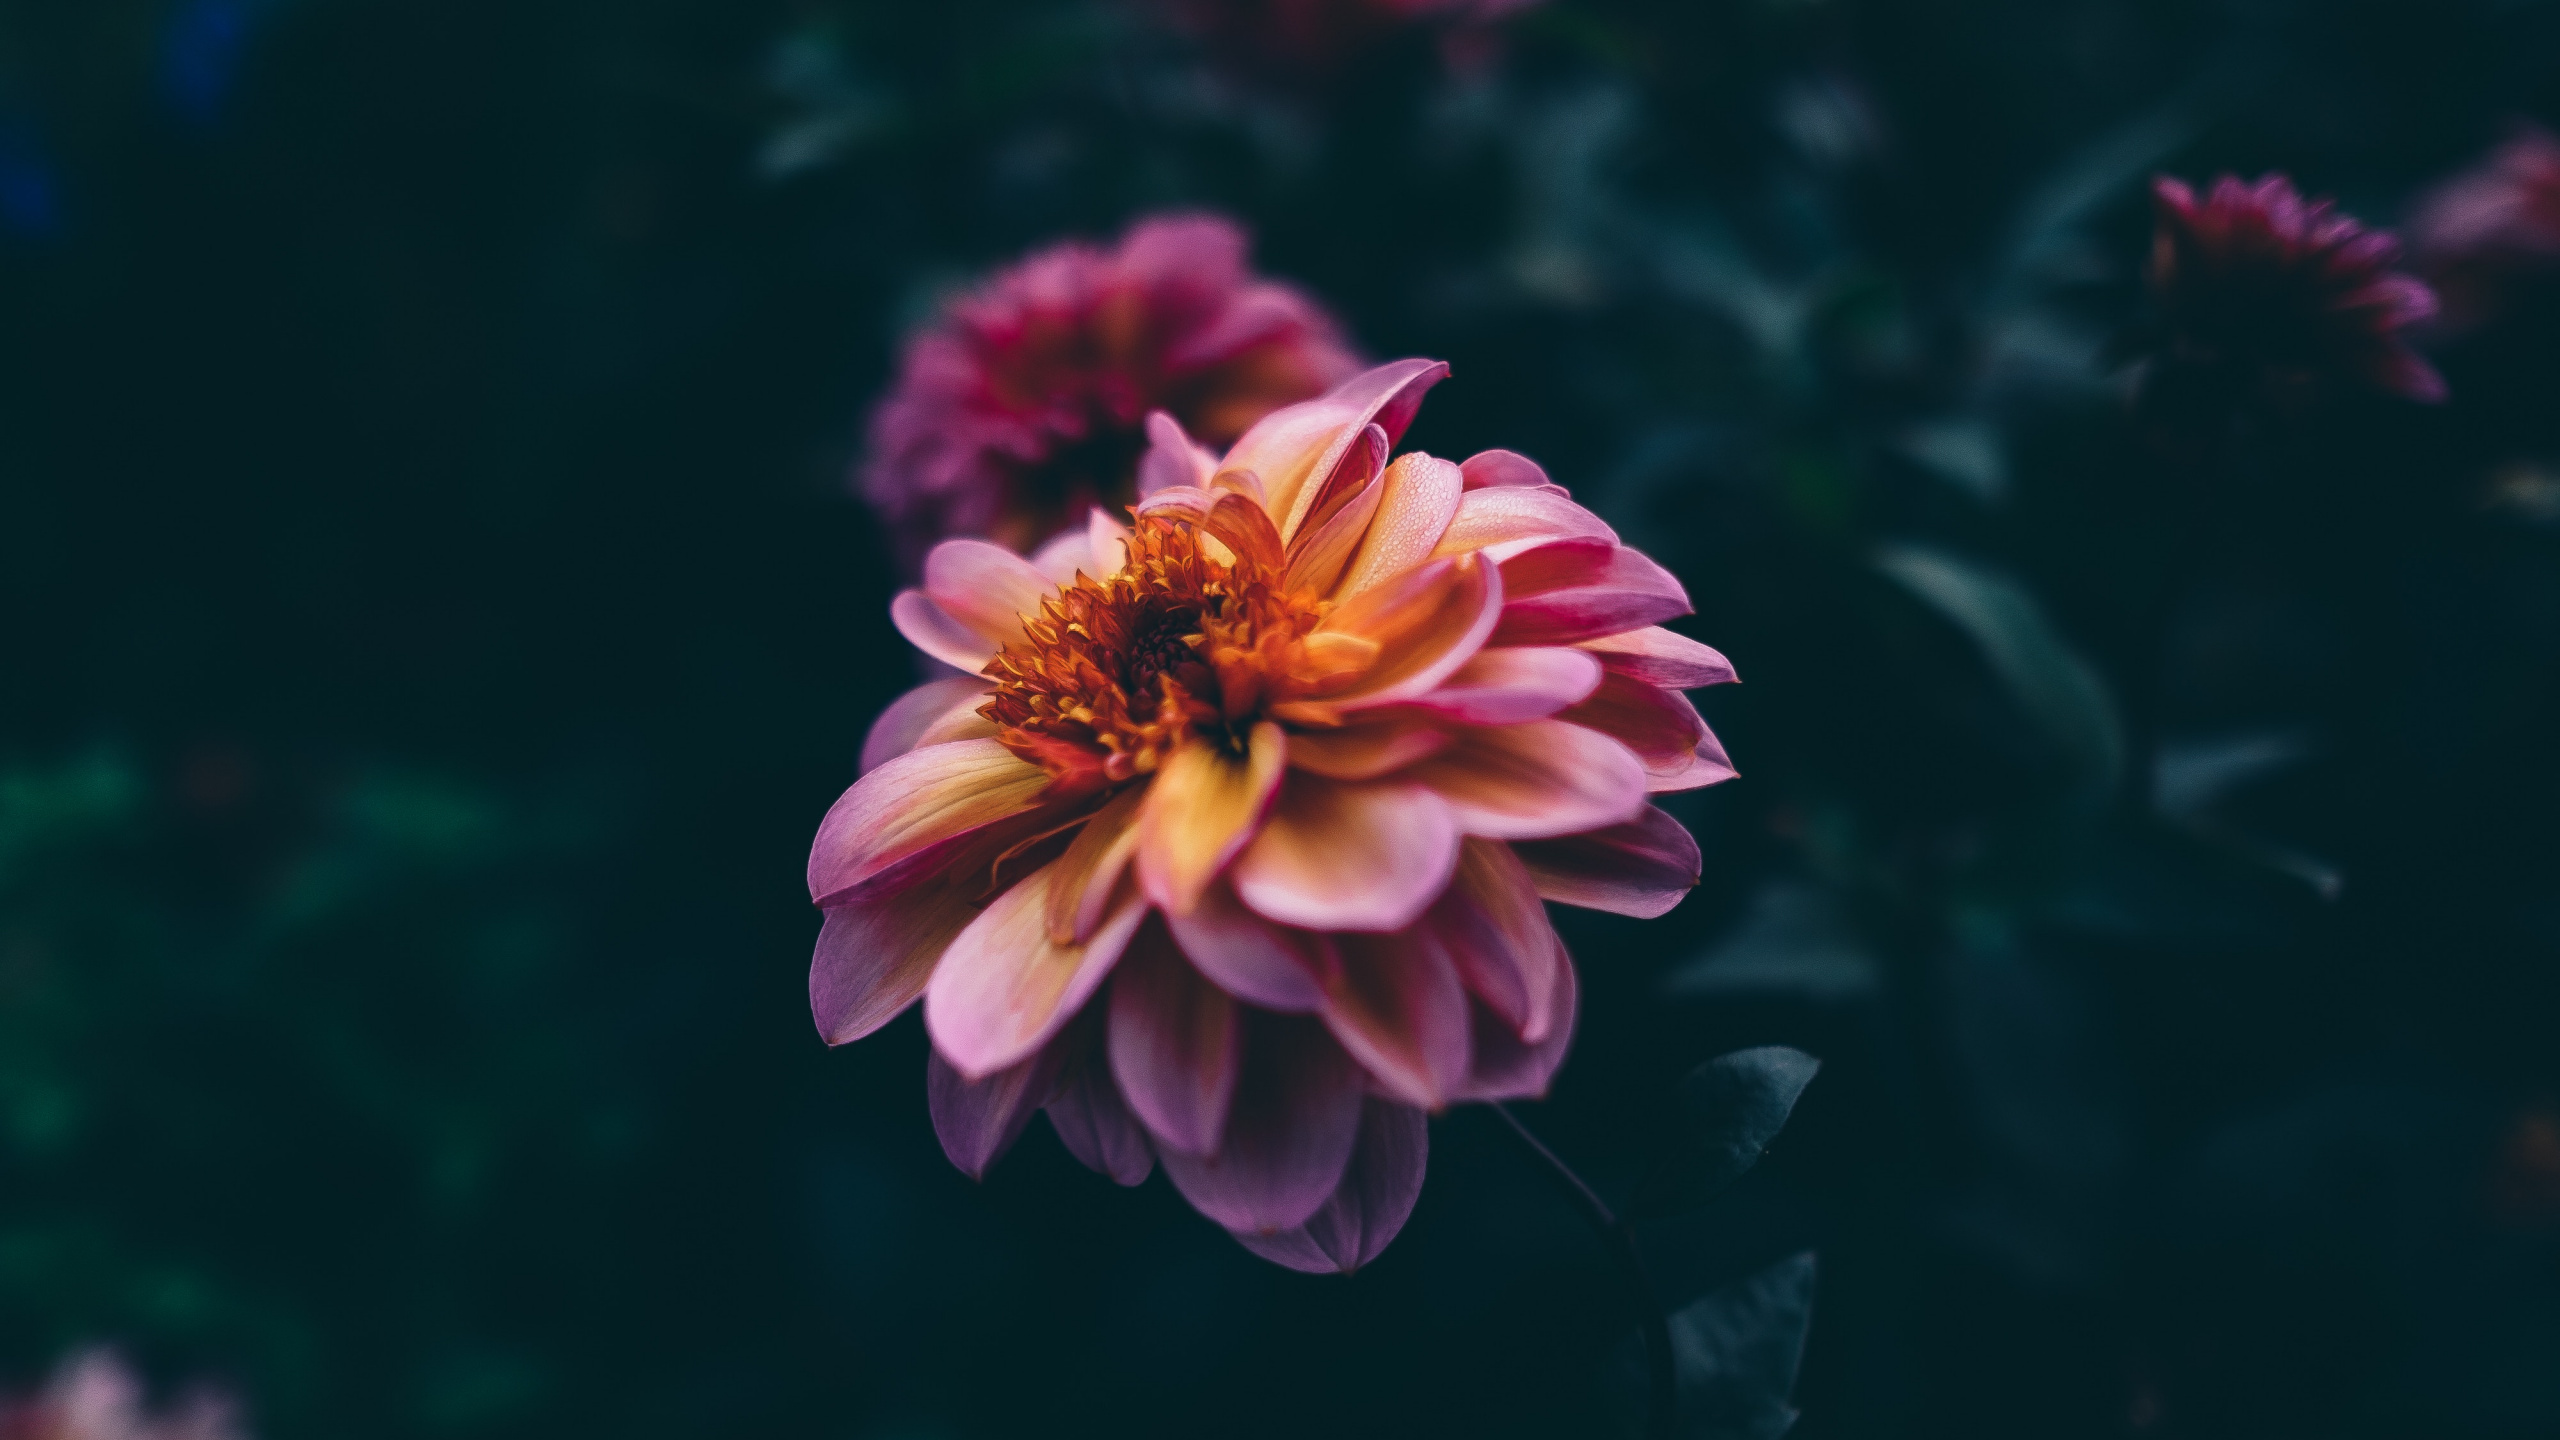 Pink and Yellow Flower in Tilt Shift Lens. Wallpaper in 2560x1440 Resolution